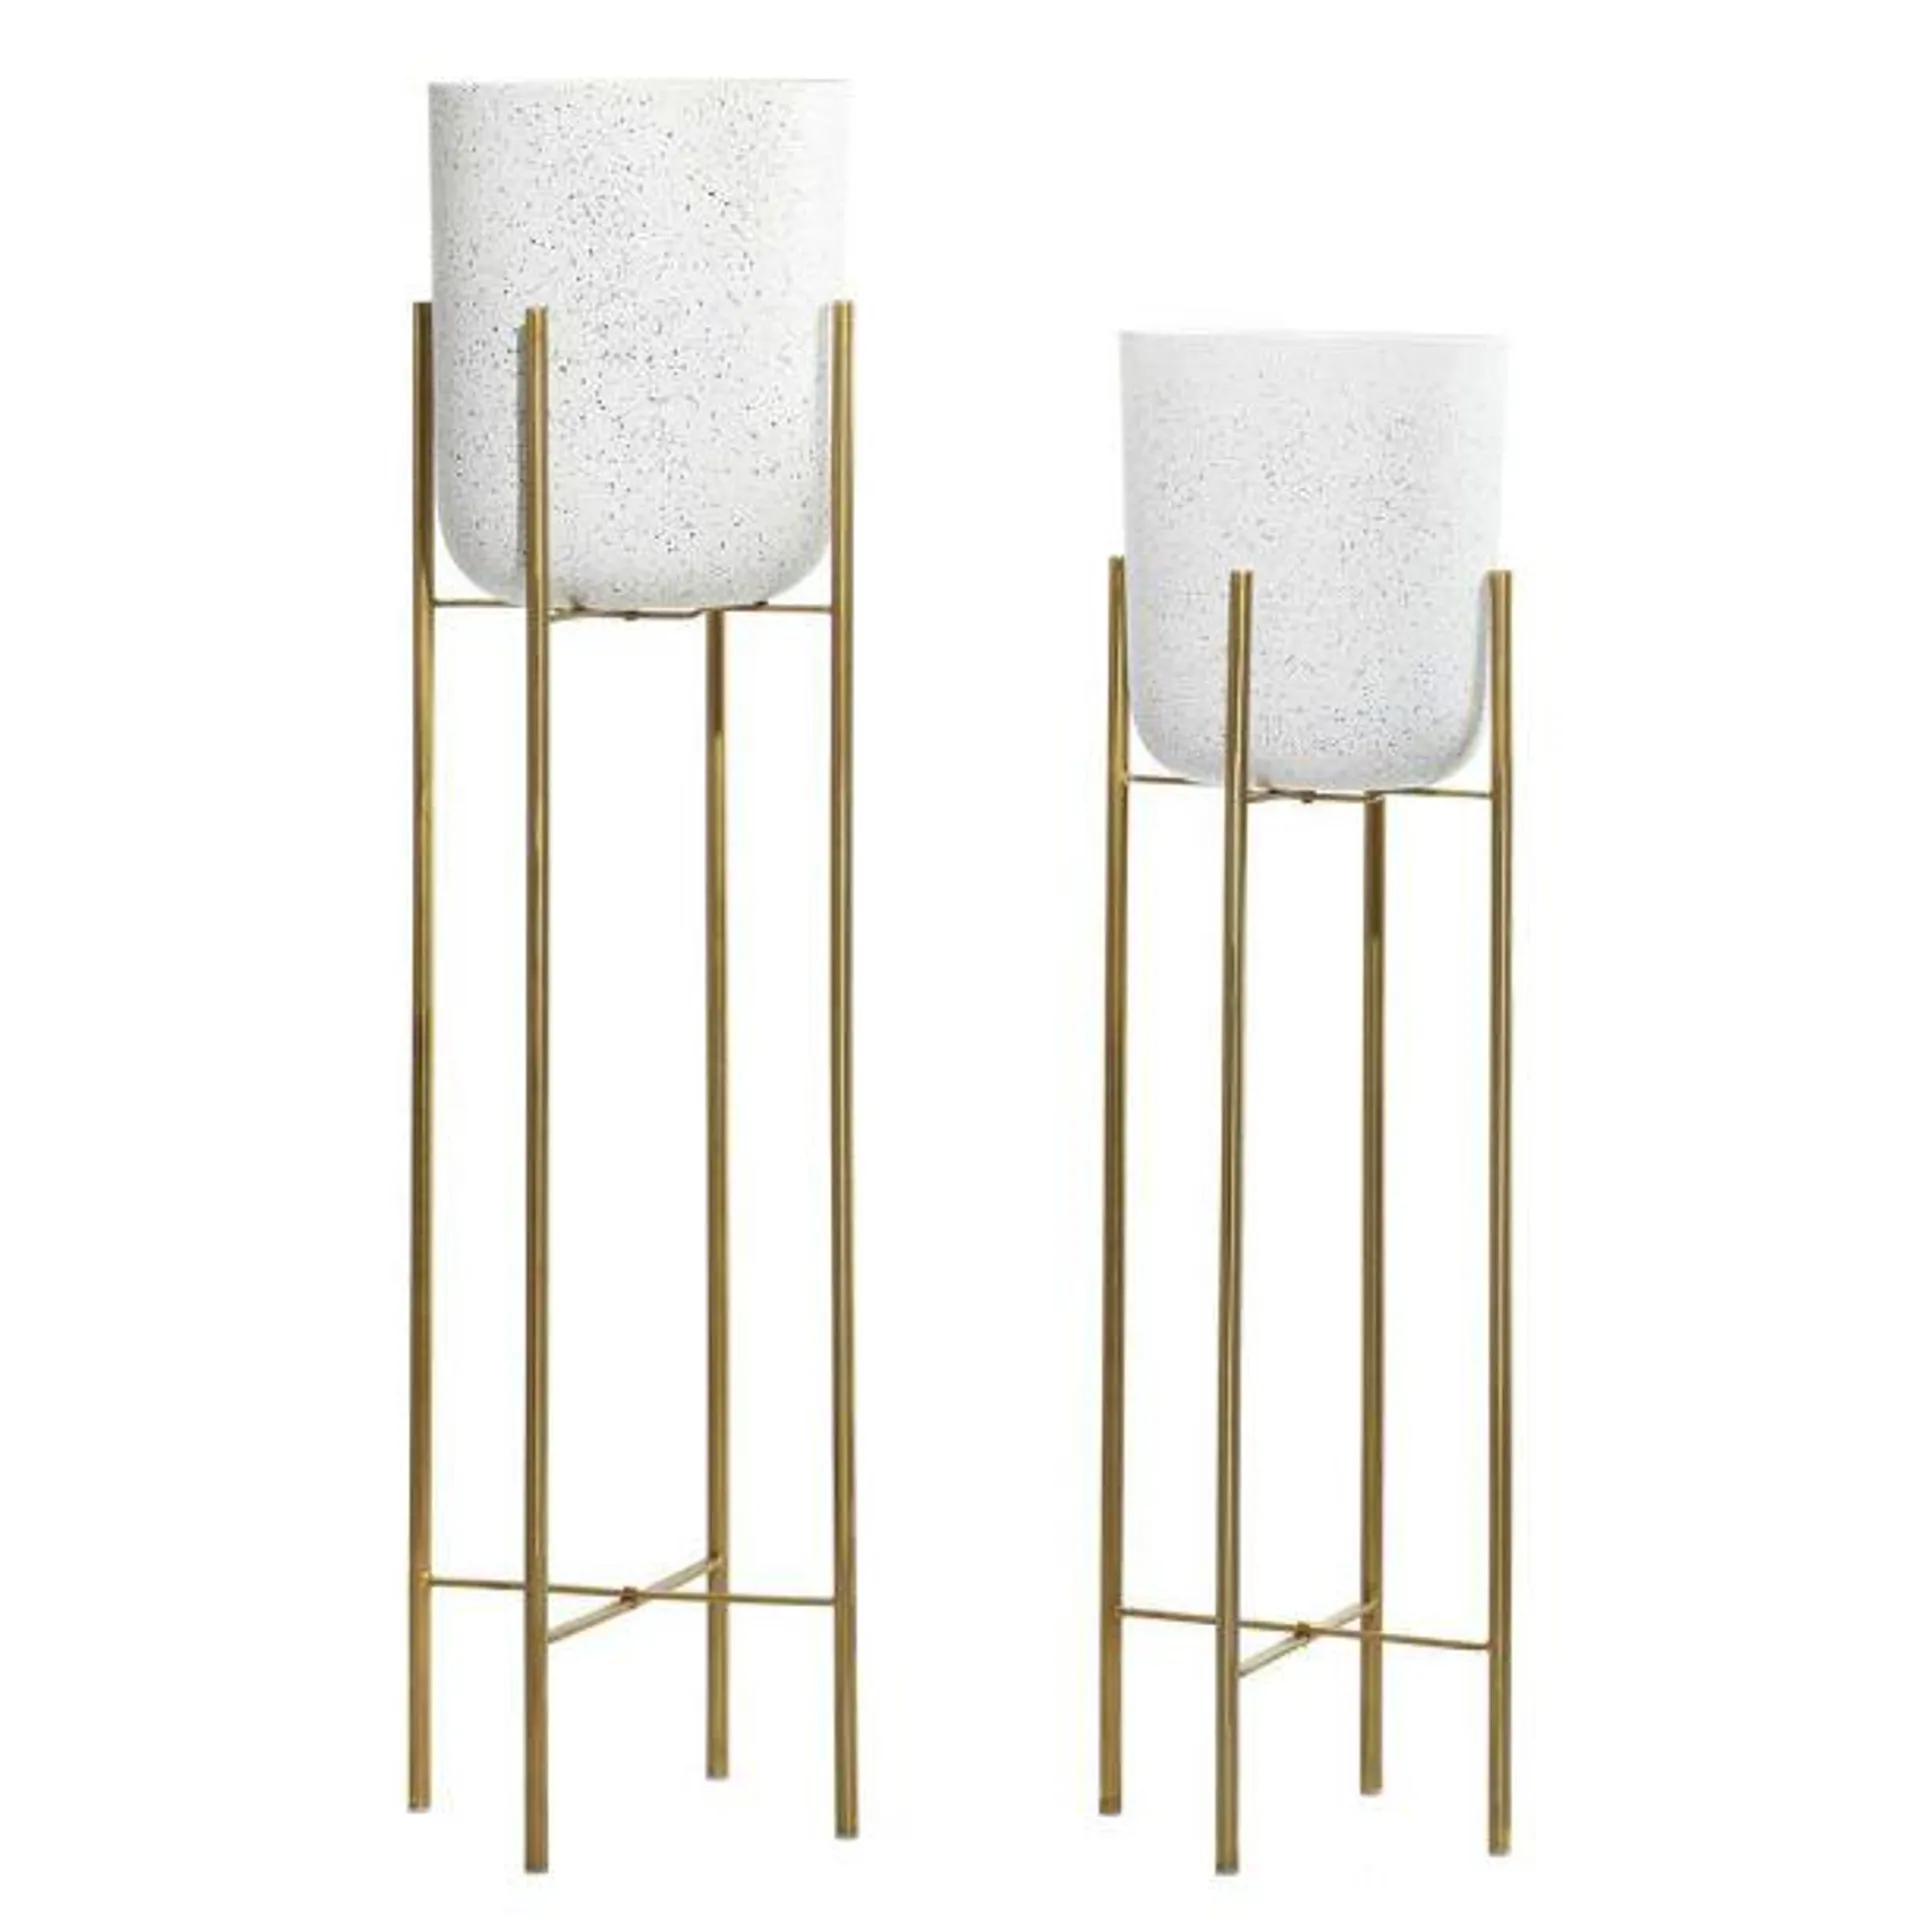 Set of 2 Metal Planters Gold/Speckled White